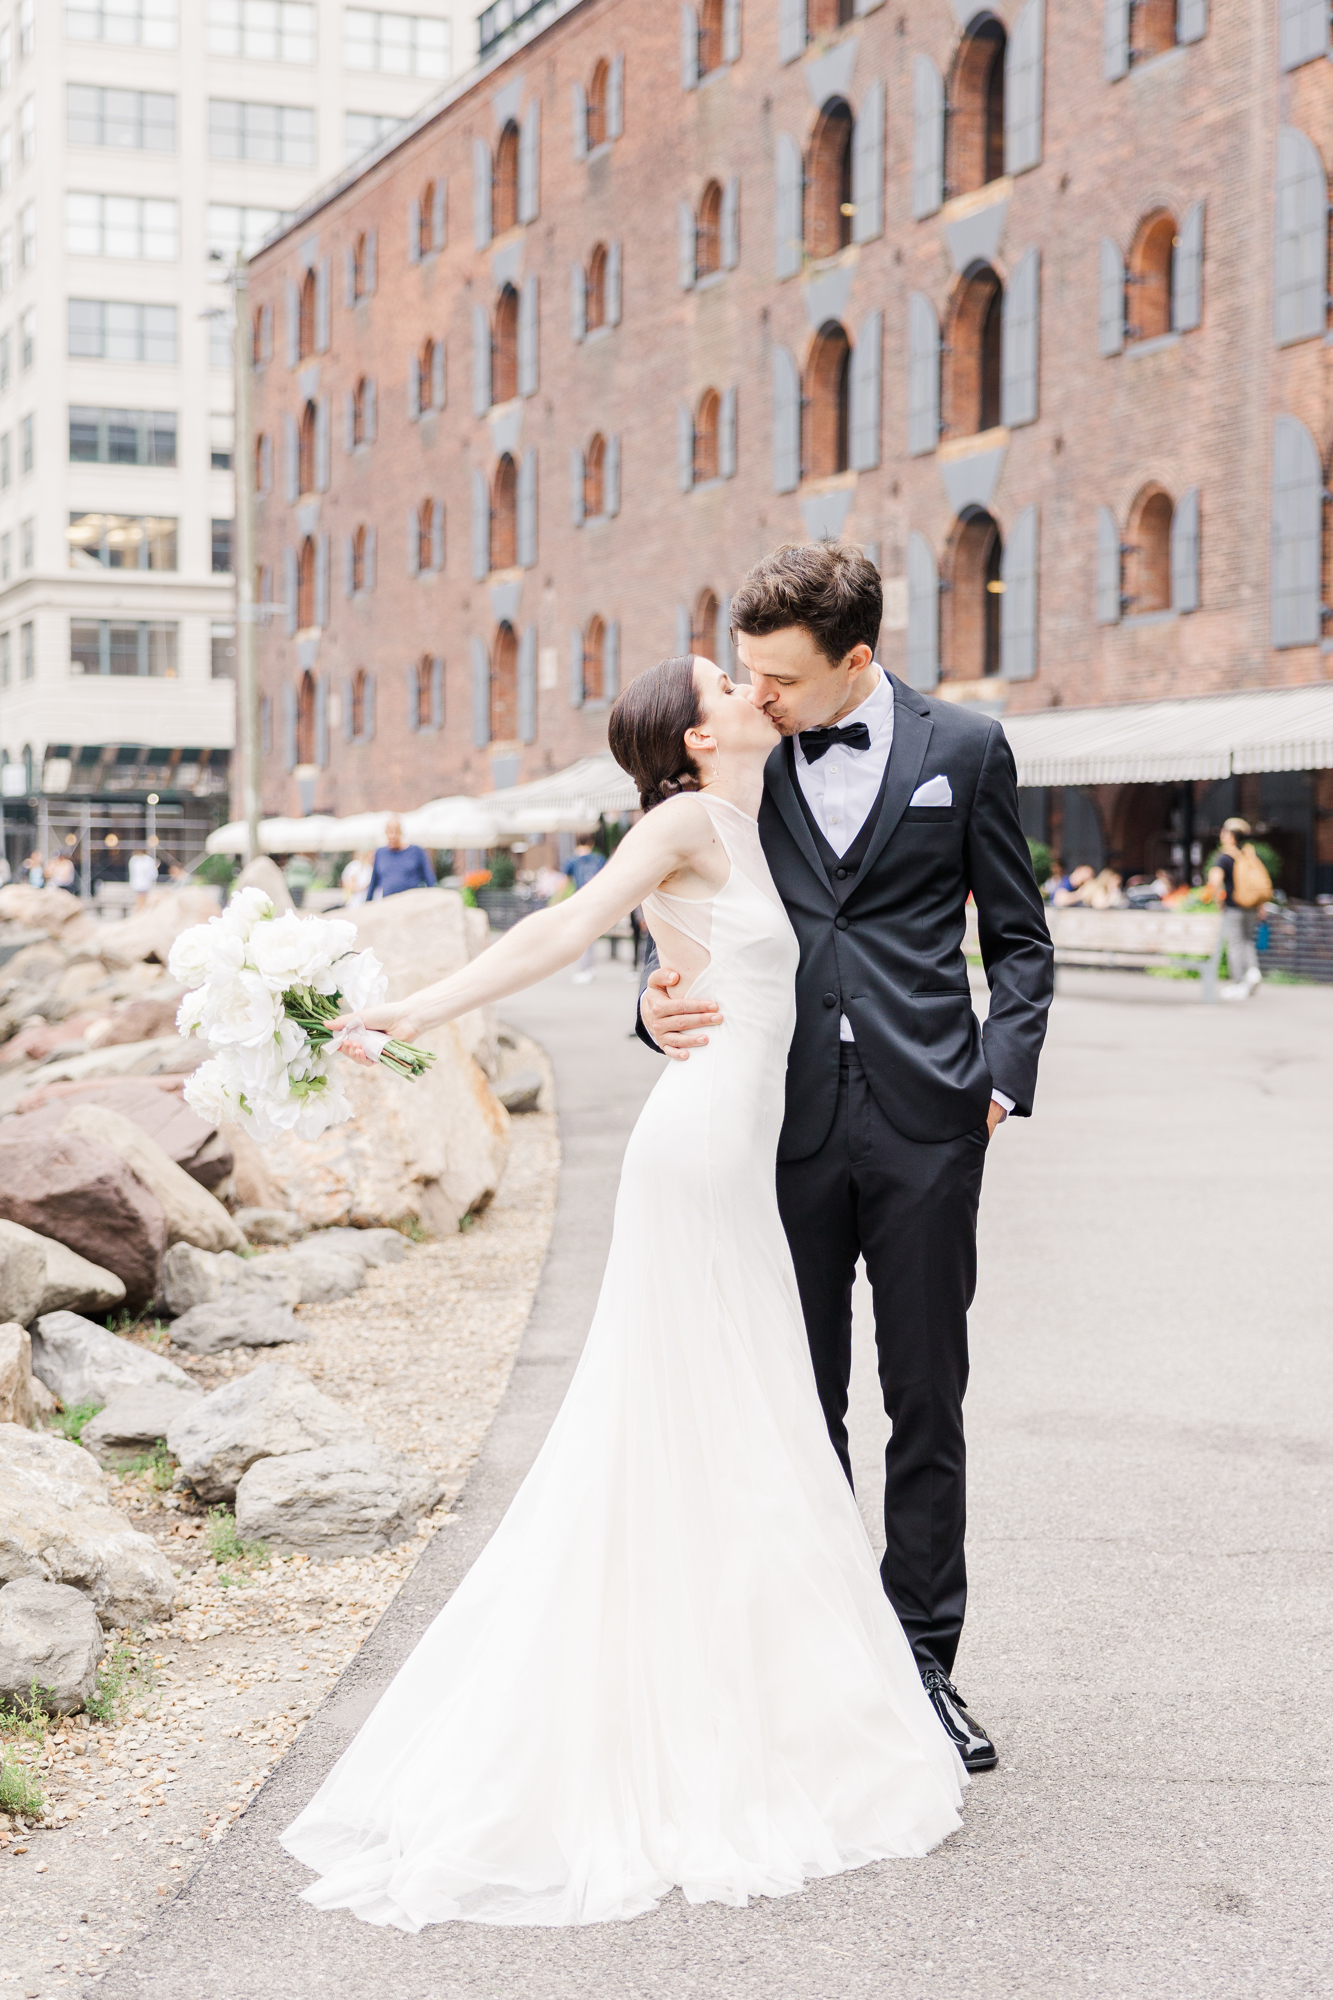 Timeless DUMBO, Brooklyn Wedding Photos at Smack Mellon and Jane's Carousel